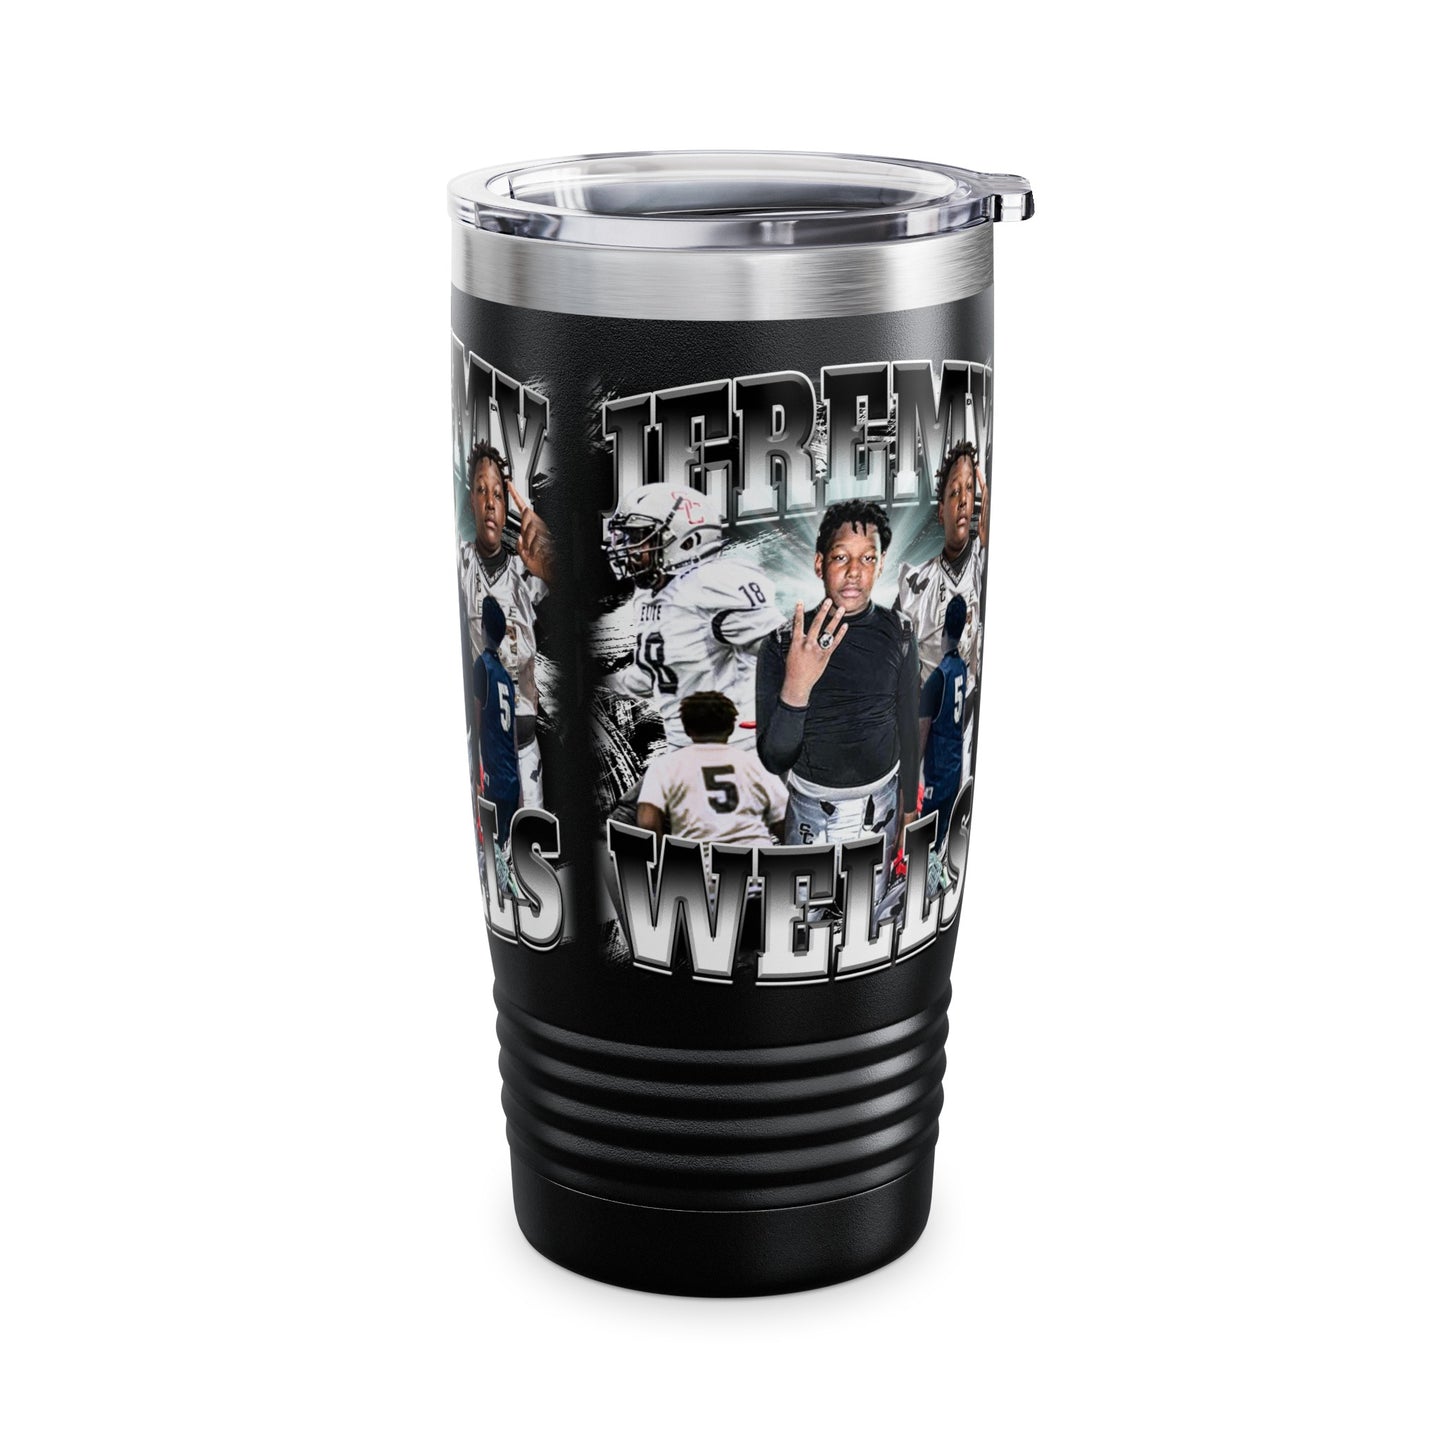 Jeremy Wells Stainless Steal Tumbler